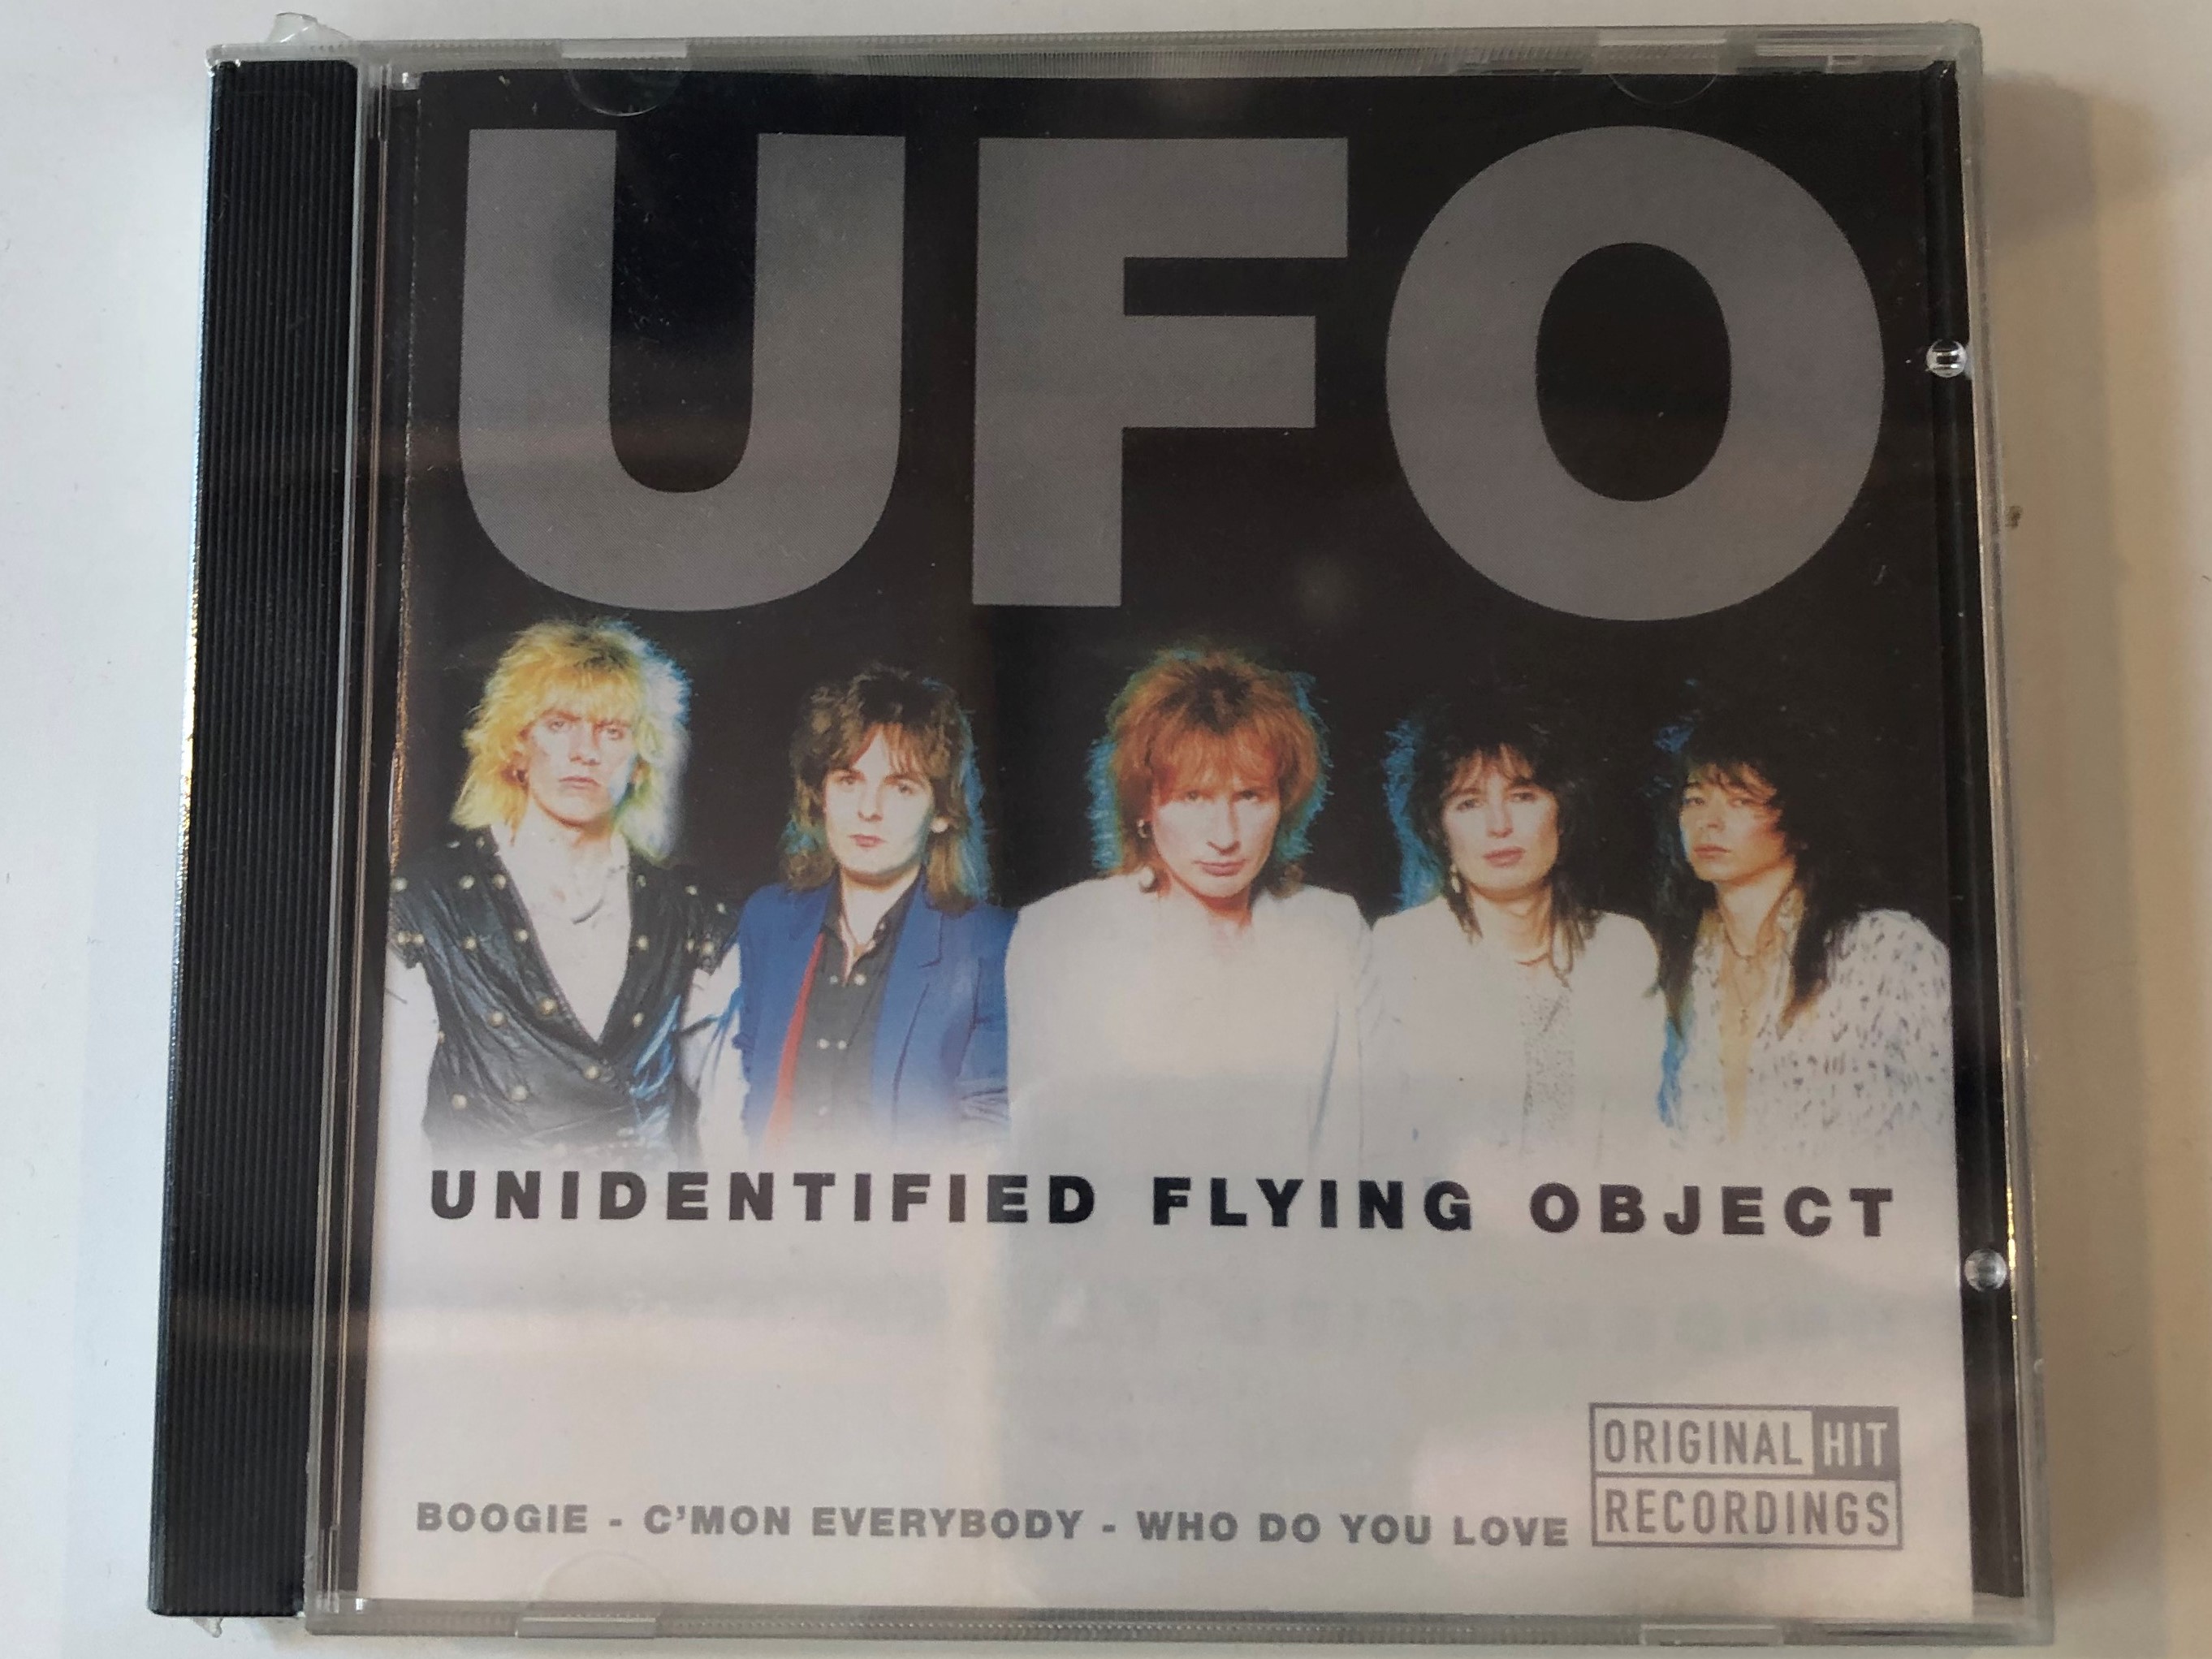 ufo-unidentified-flying-object-boogie-c-mon-everybody-who-do-you-love-original-hit-recordings-wise-buy-audio-cd-1998-wb-885952-1-.jpg